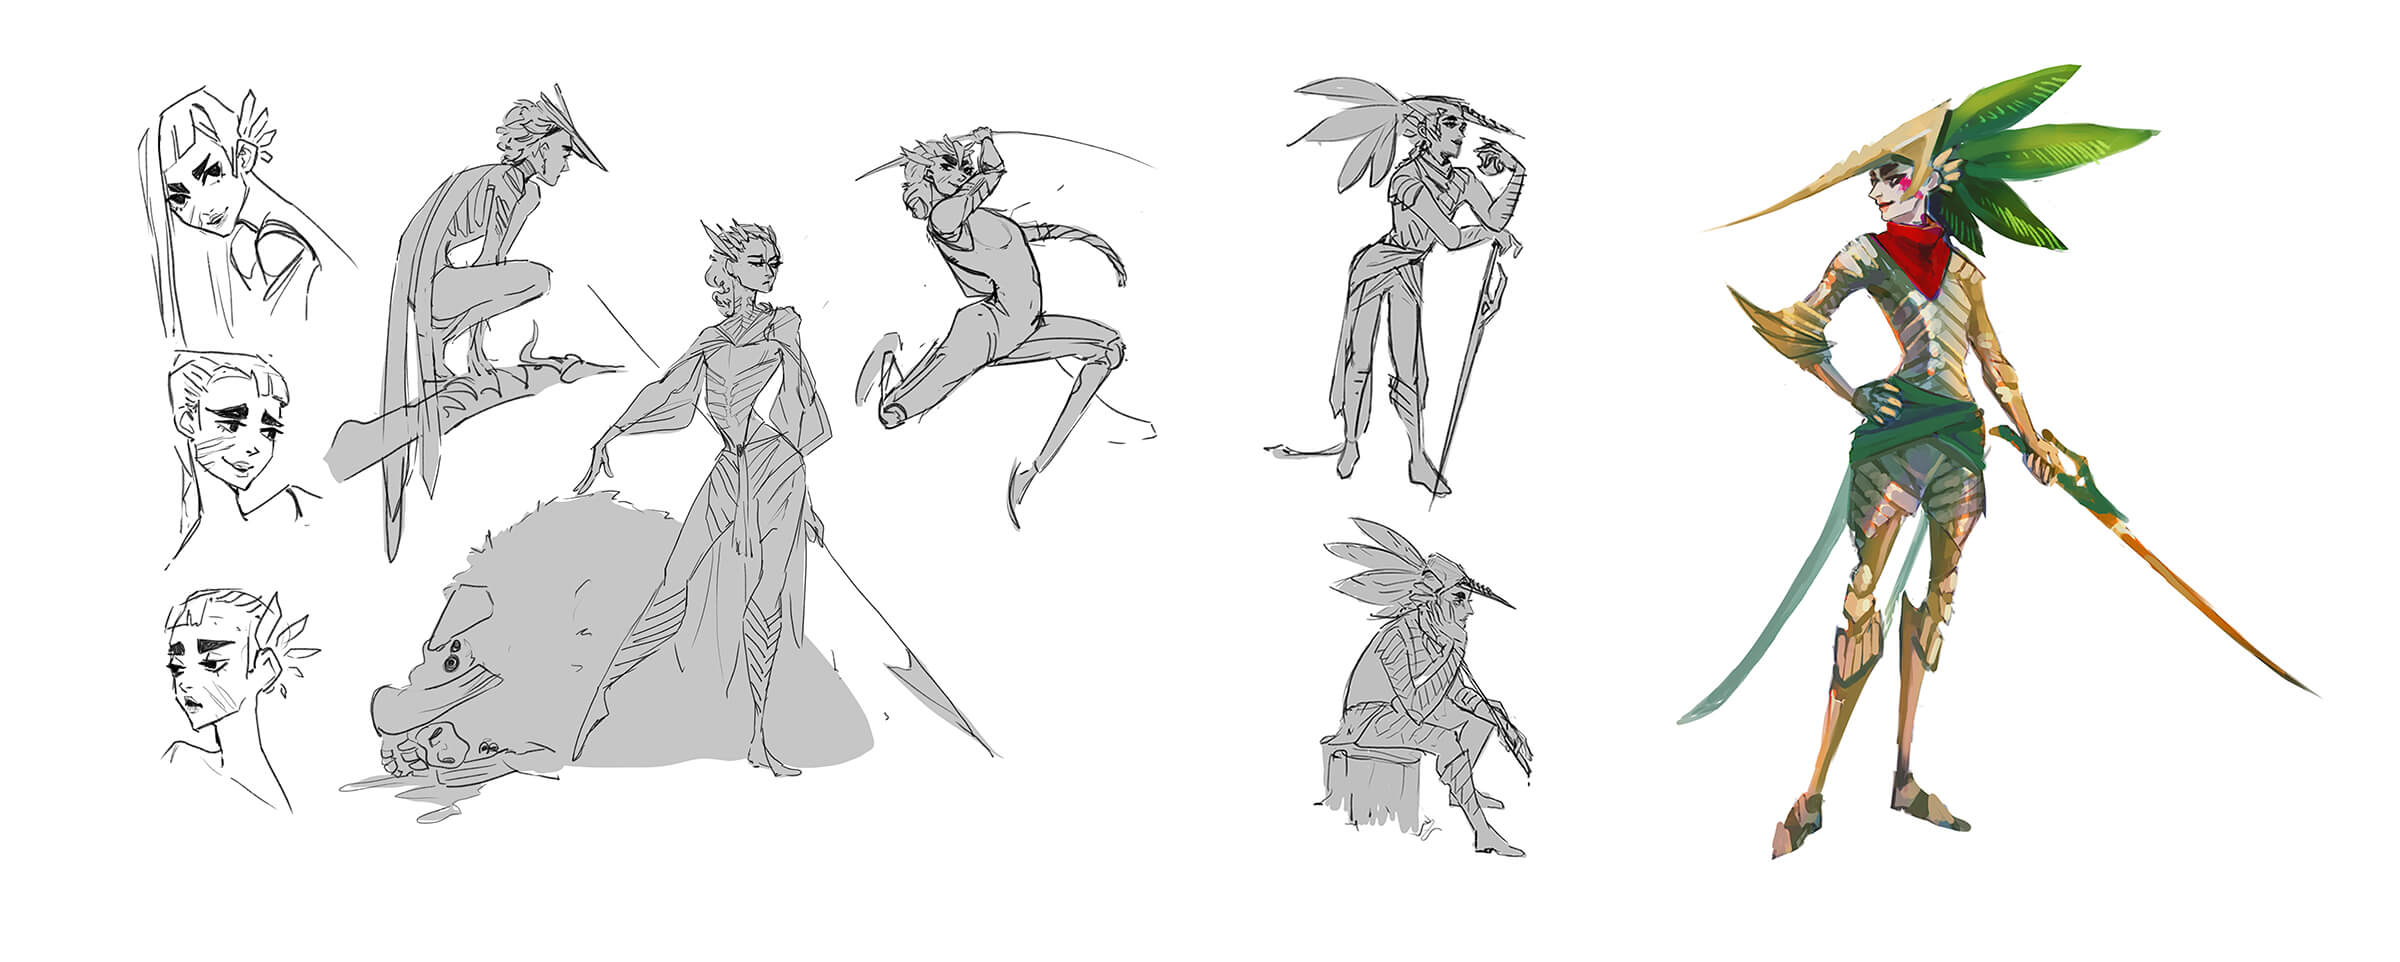 Sketches of a fairy carrying a sword